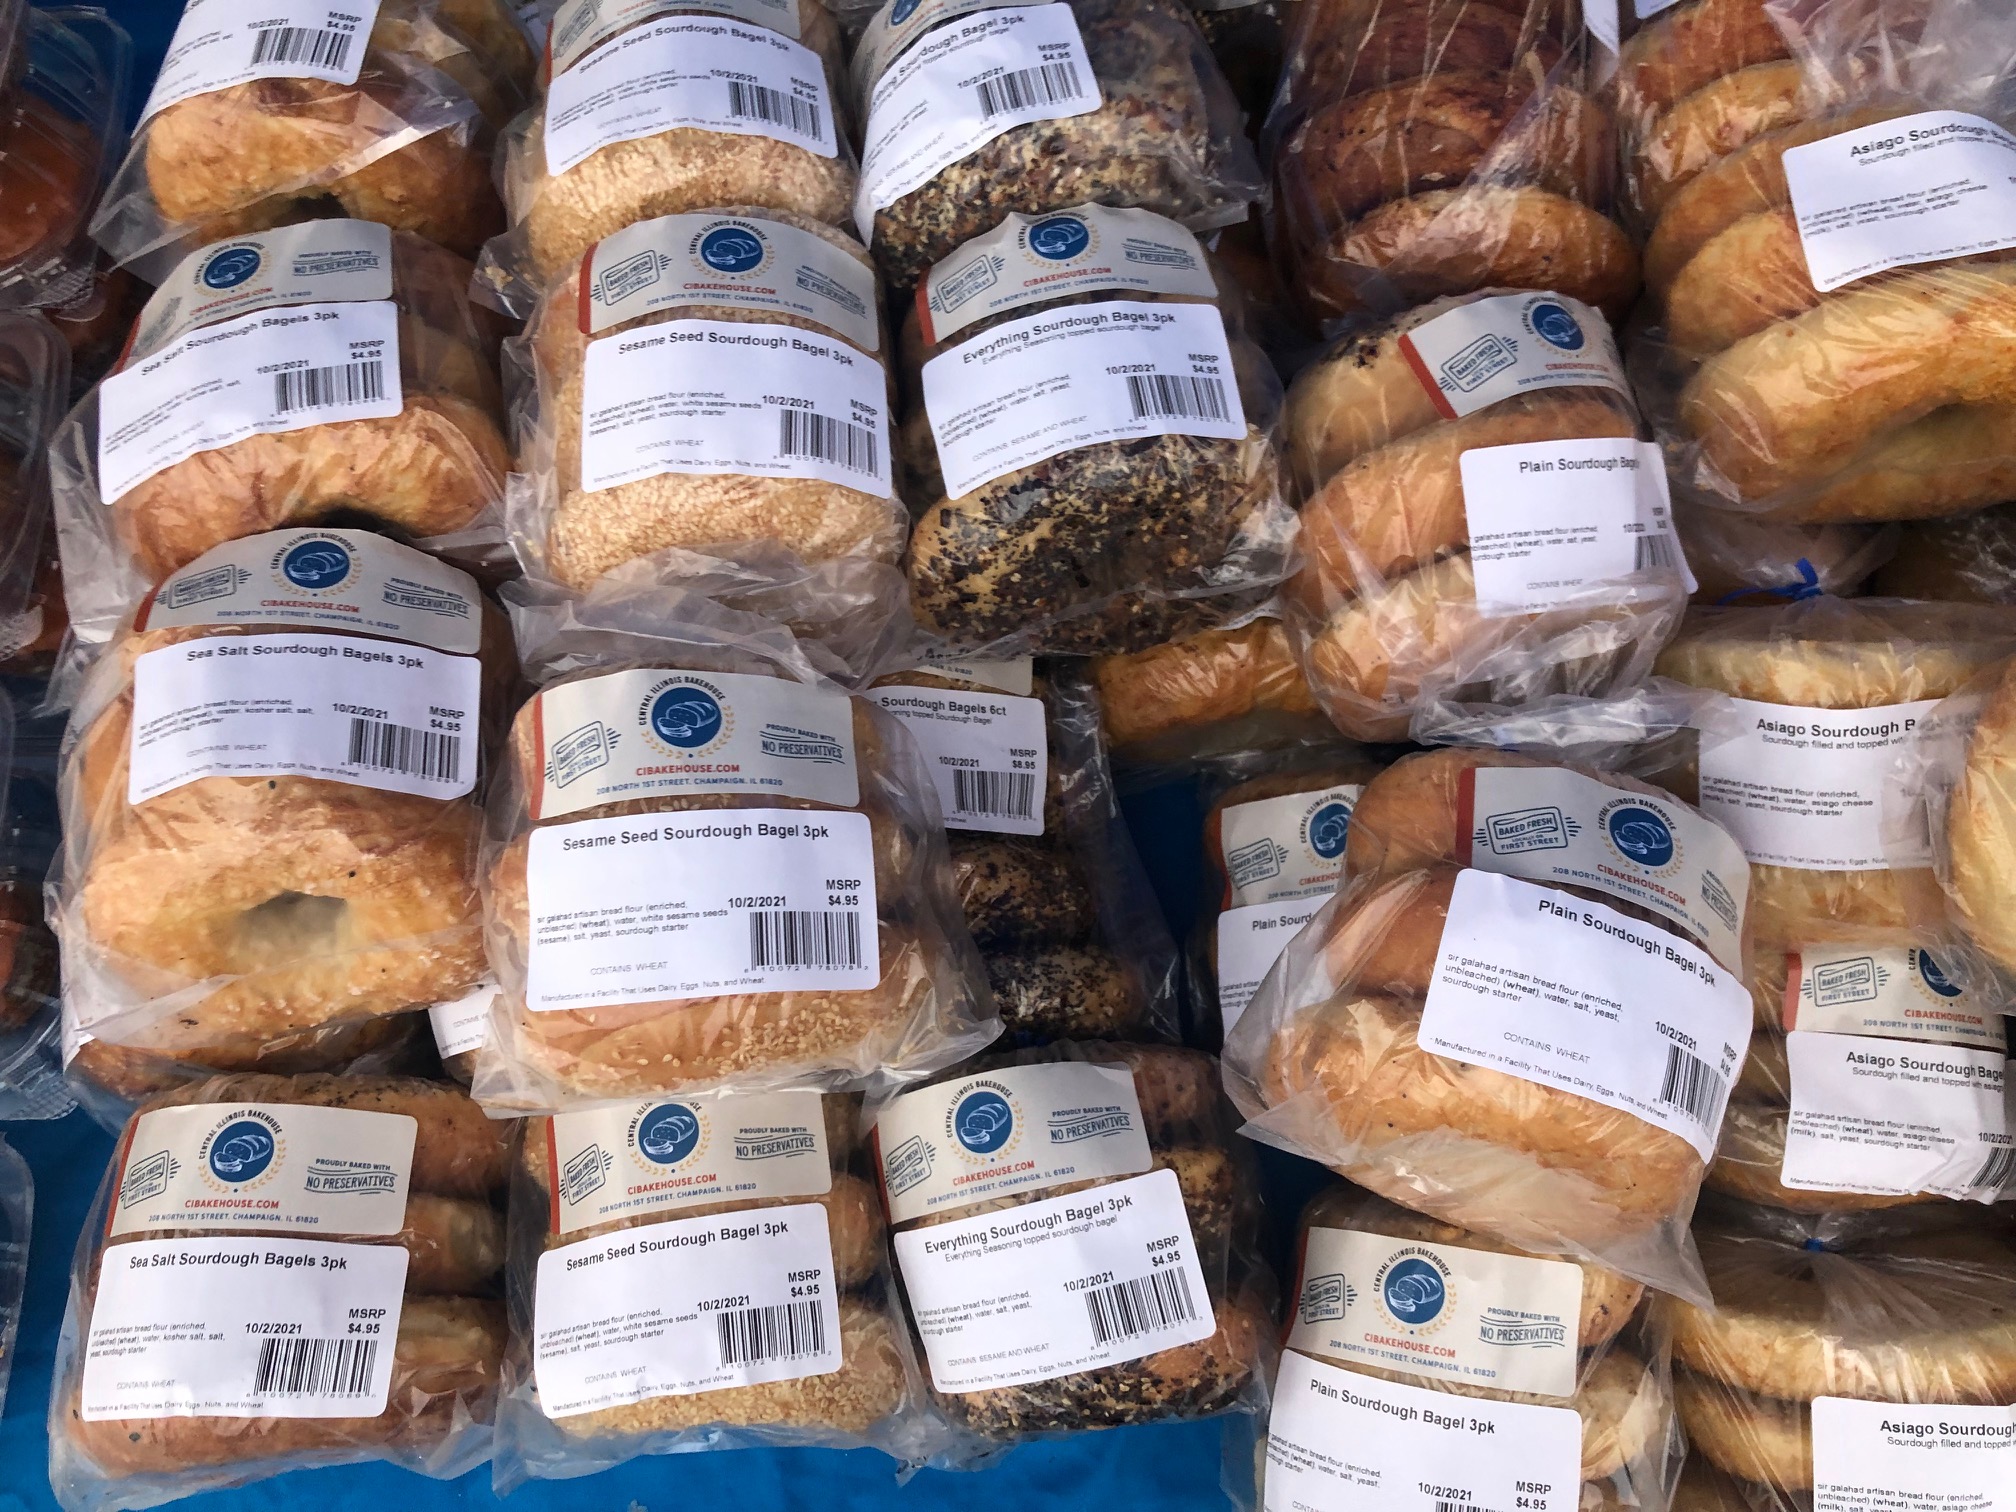 Rows of packaged bagels fill the image. Photo by Alyssa Buckley.